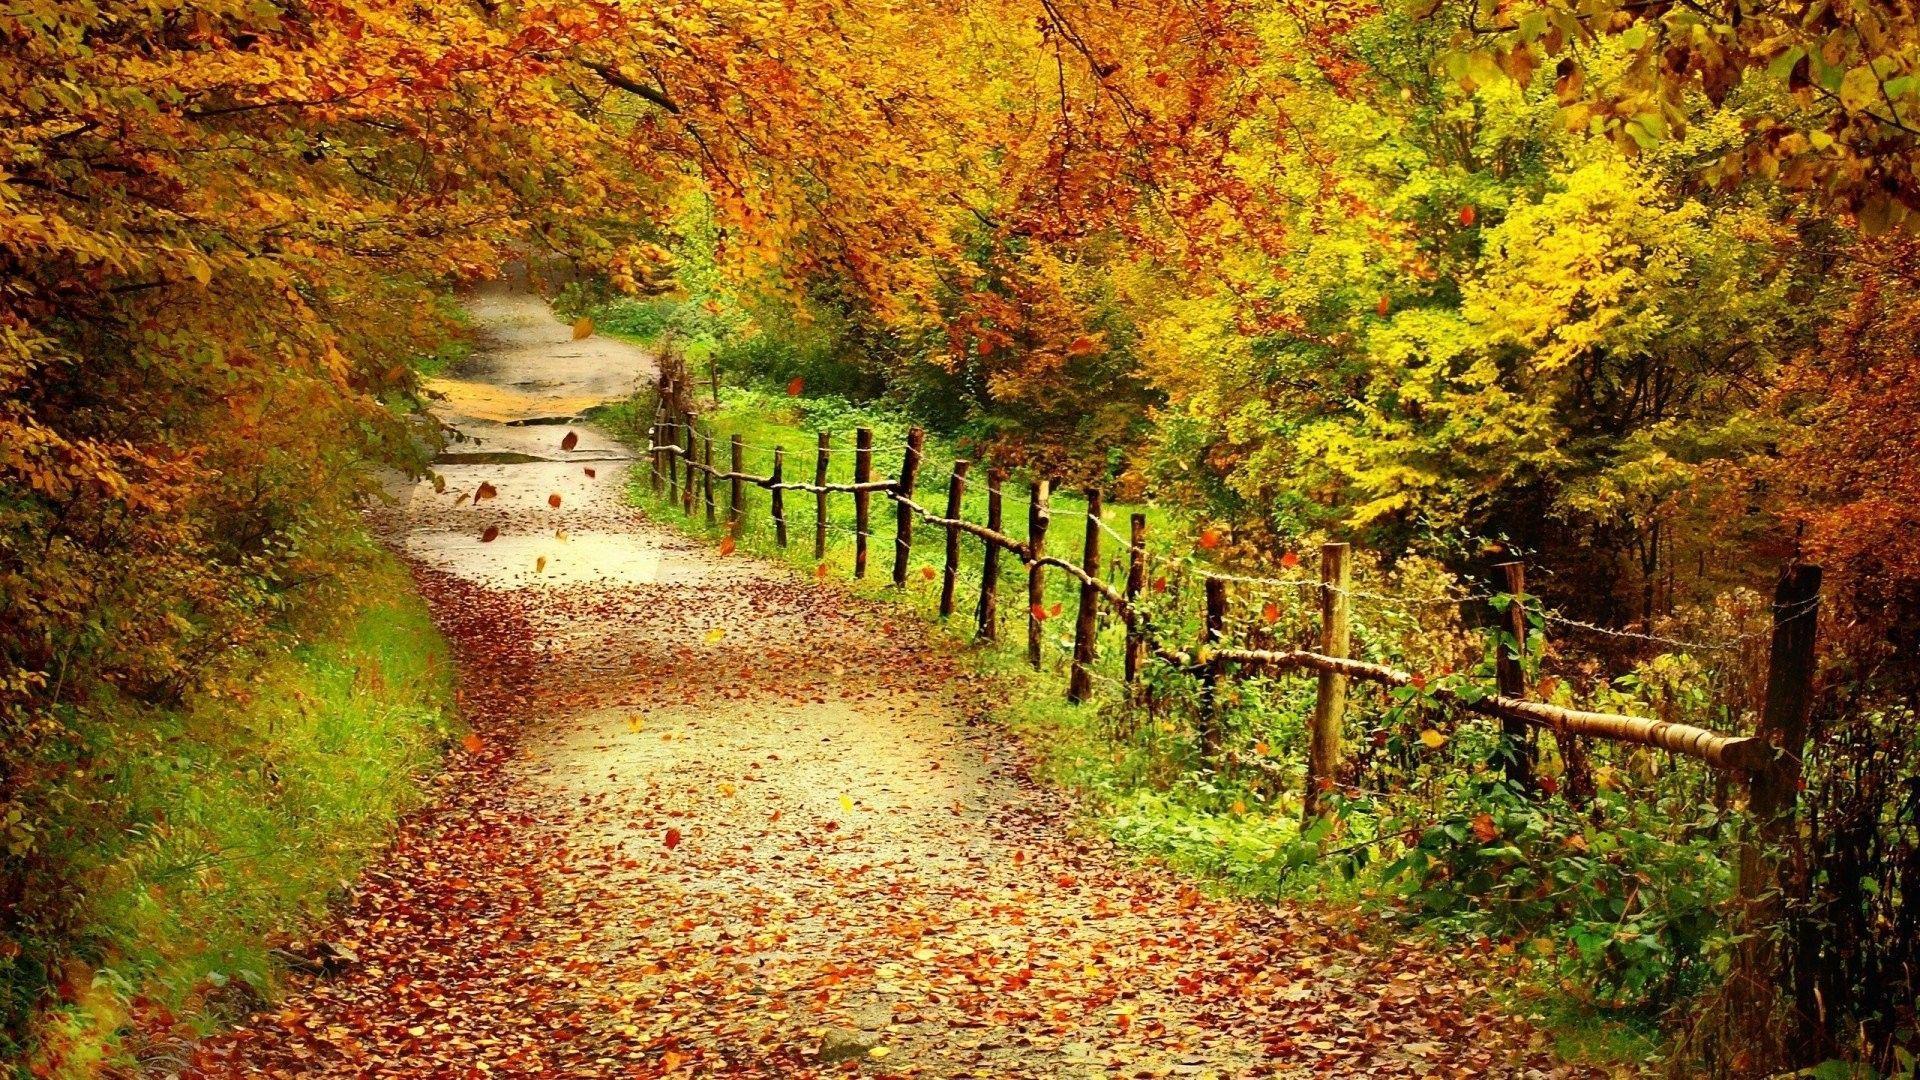 Trail Tag wallpaper: Nature Autumn Trail Leaves Forest Landscape